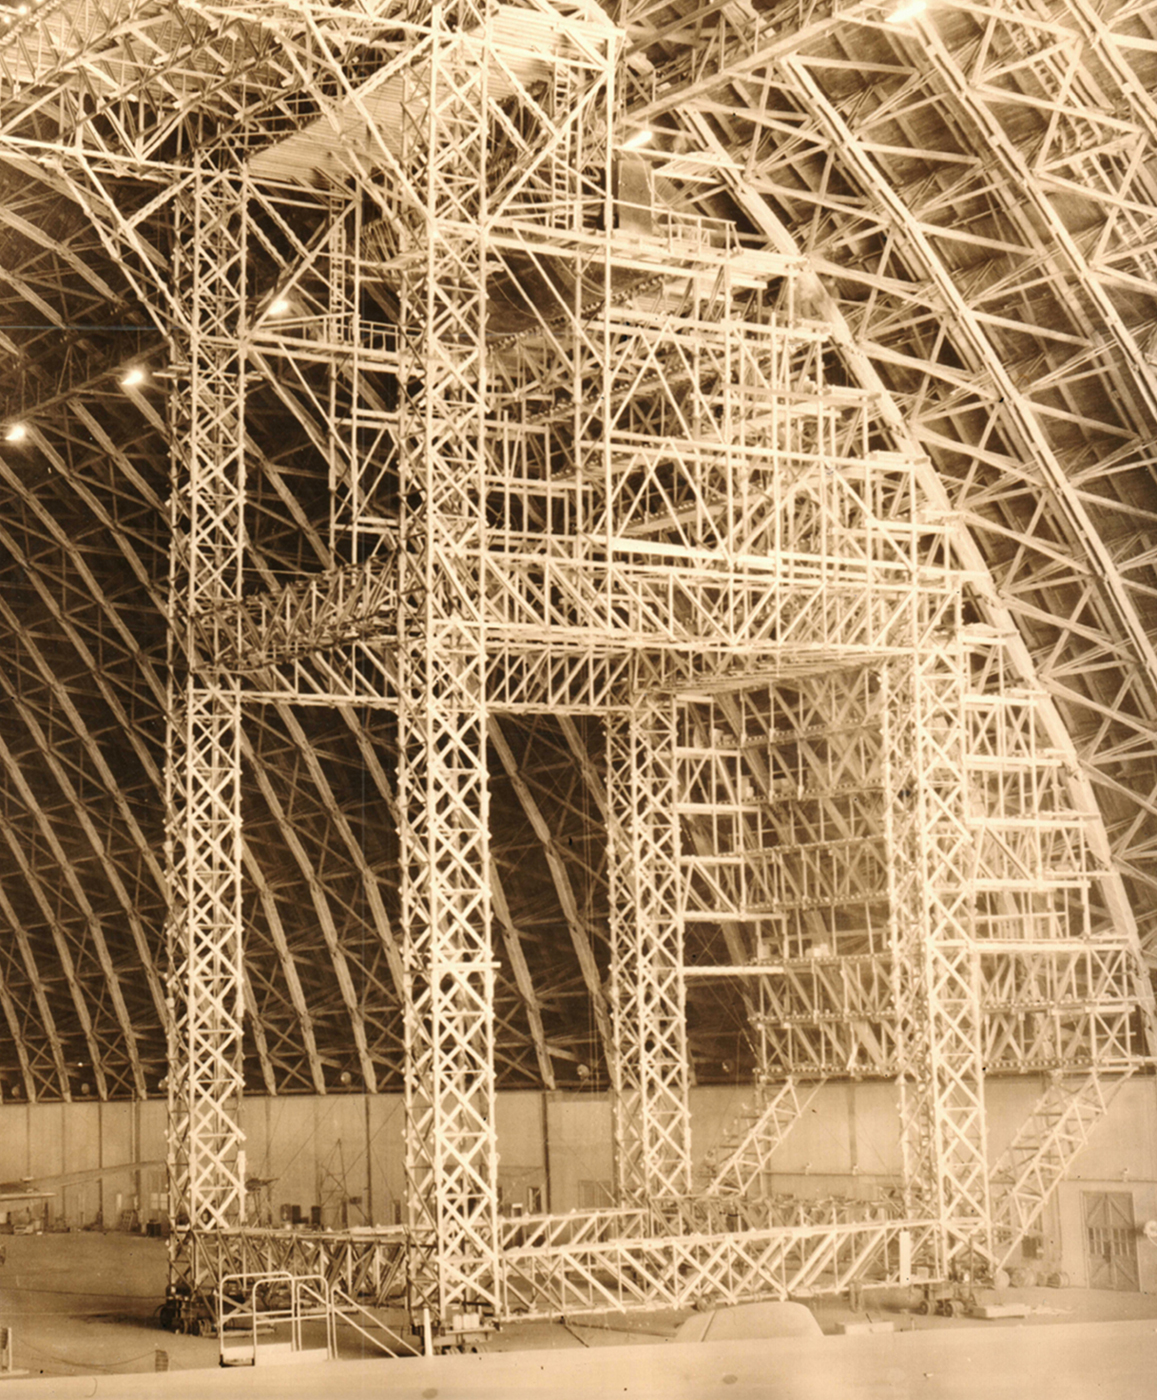 A tall, wide scaffolding tower inside the hangar. Its curved side mirrors the parabolic arch trusses of the hangar to efficiently fix the structure.